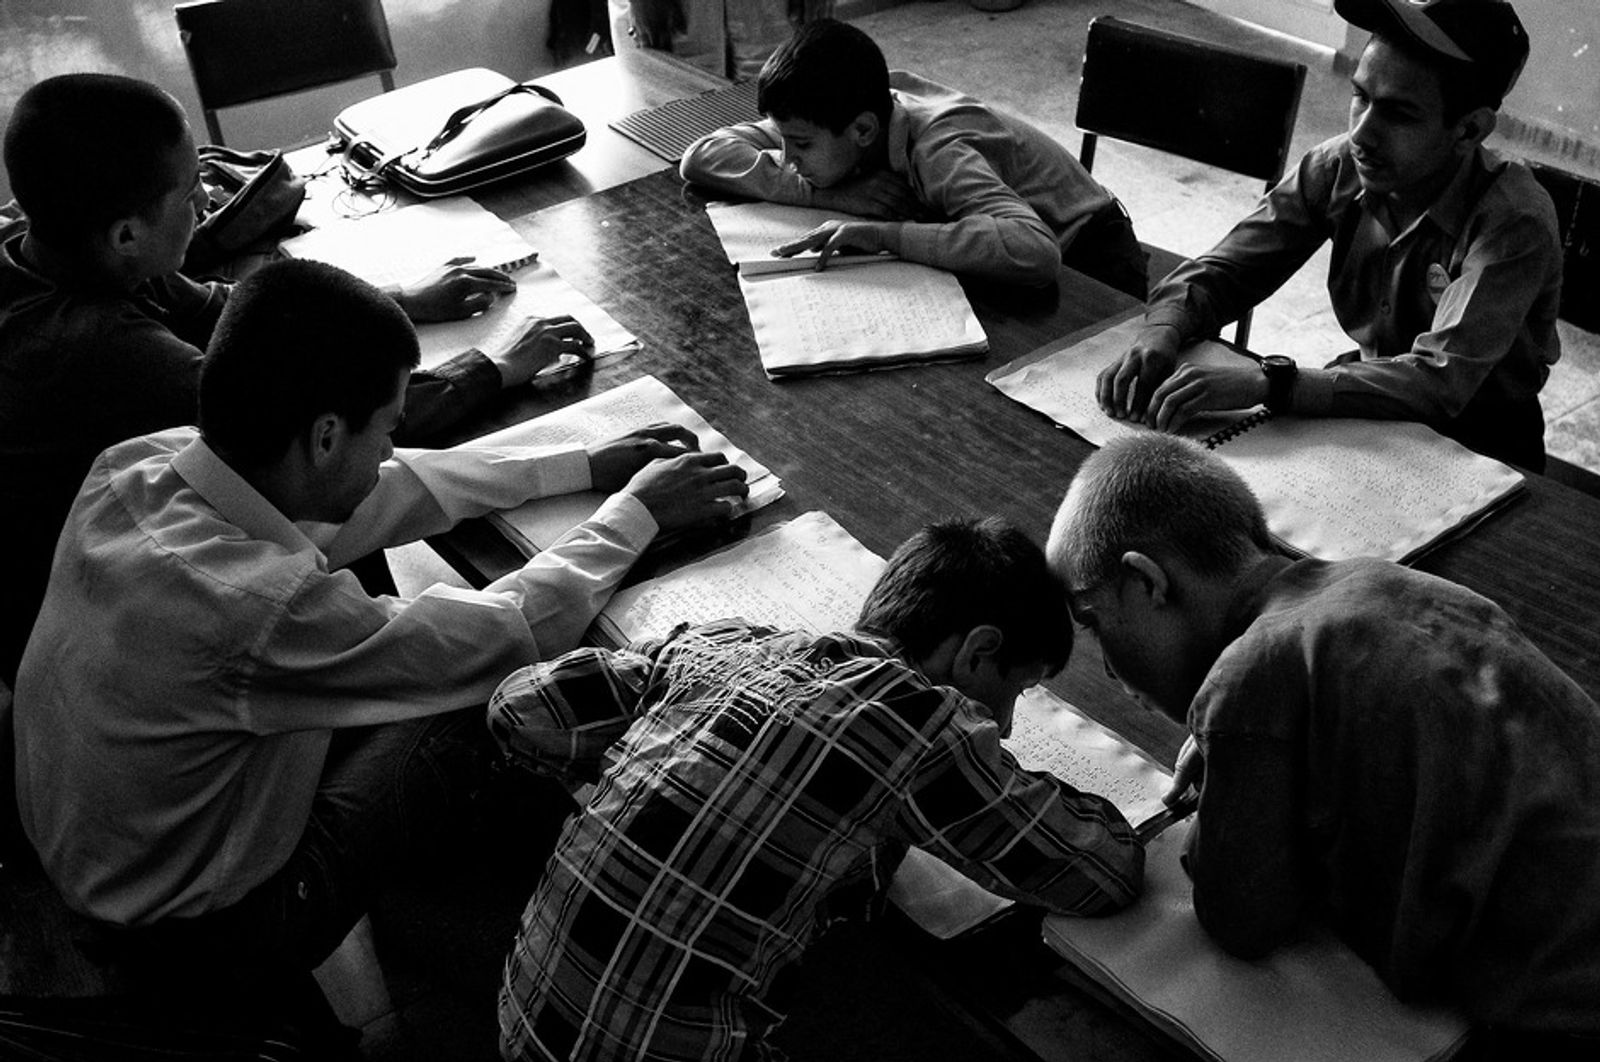 © Mateusz Jazwiecki - Image from the Kabul Blind School photography project